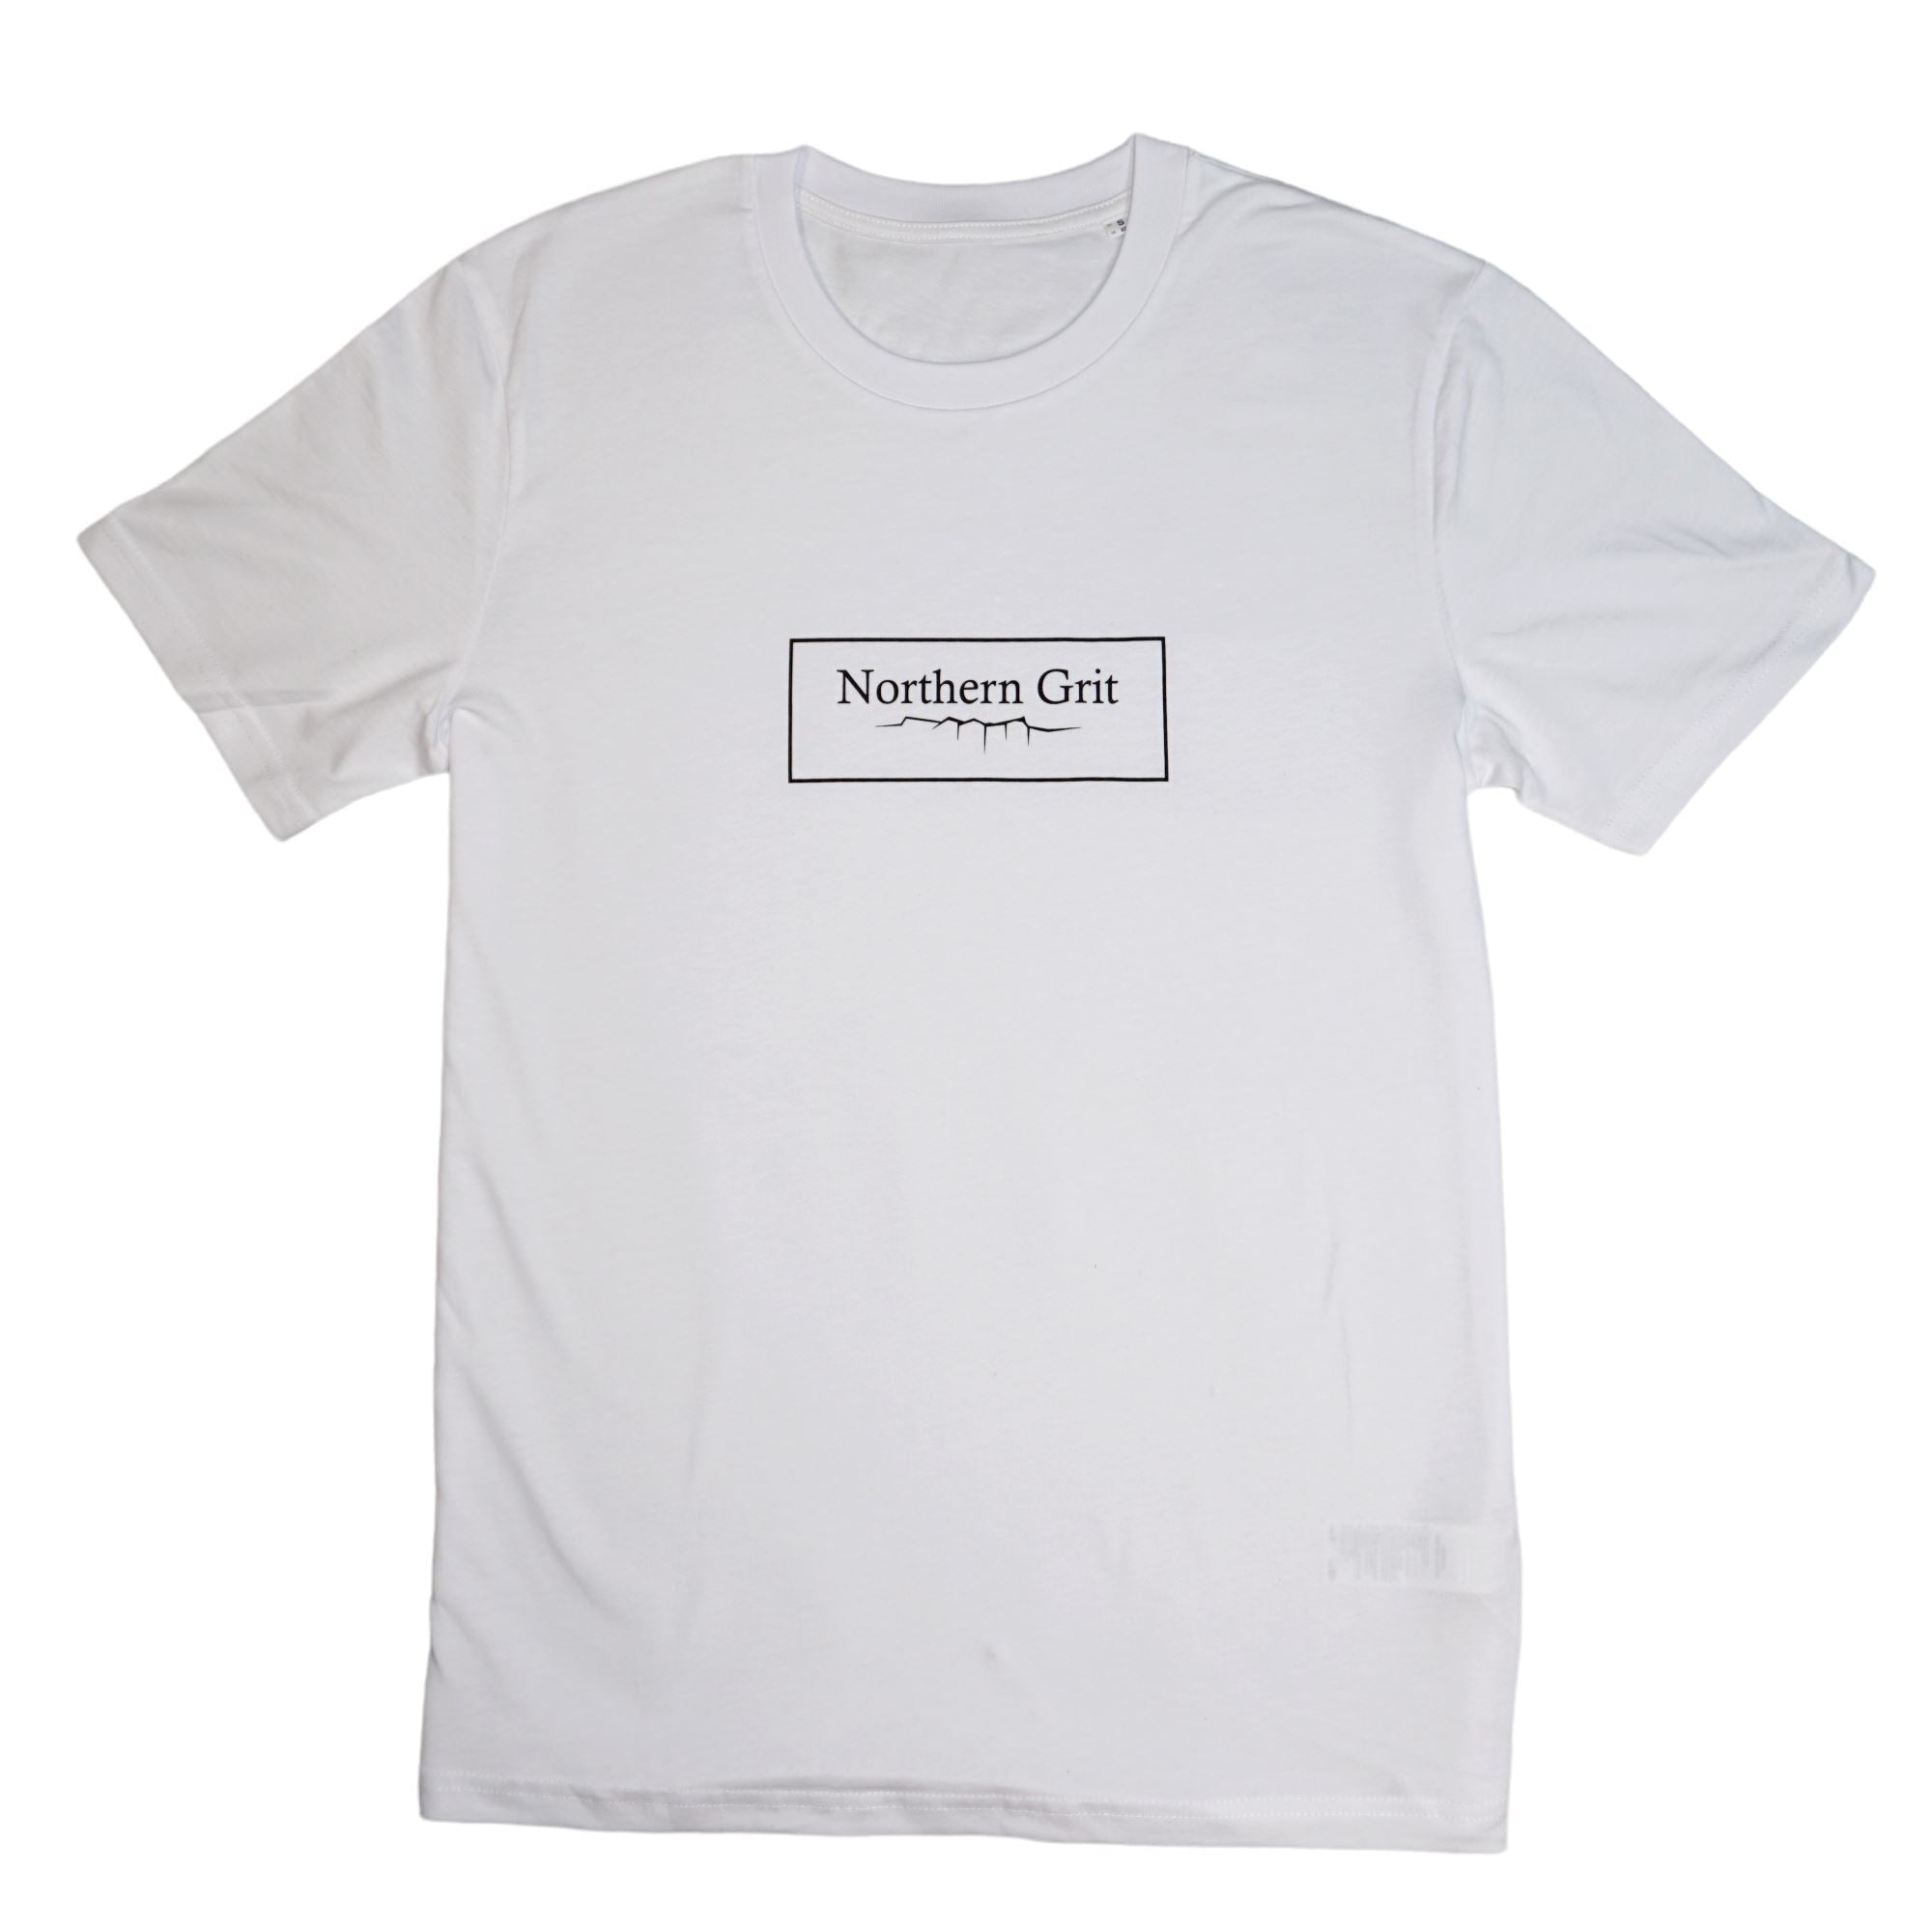 Northern Grit T-Shirt The Alternative Store Small White 